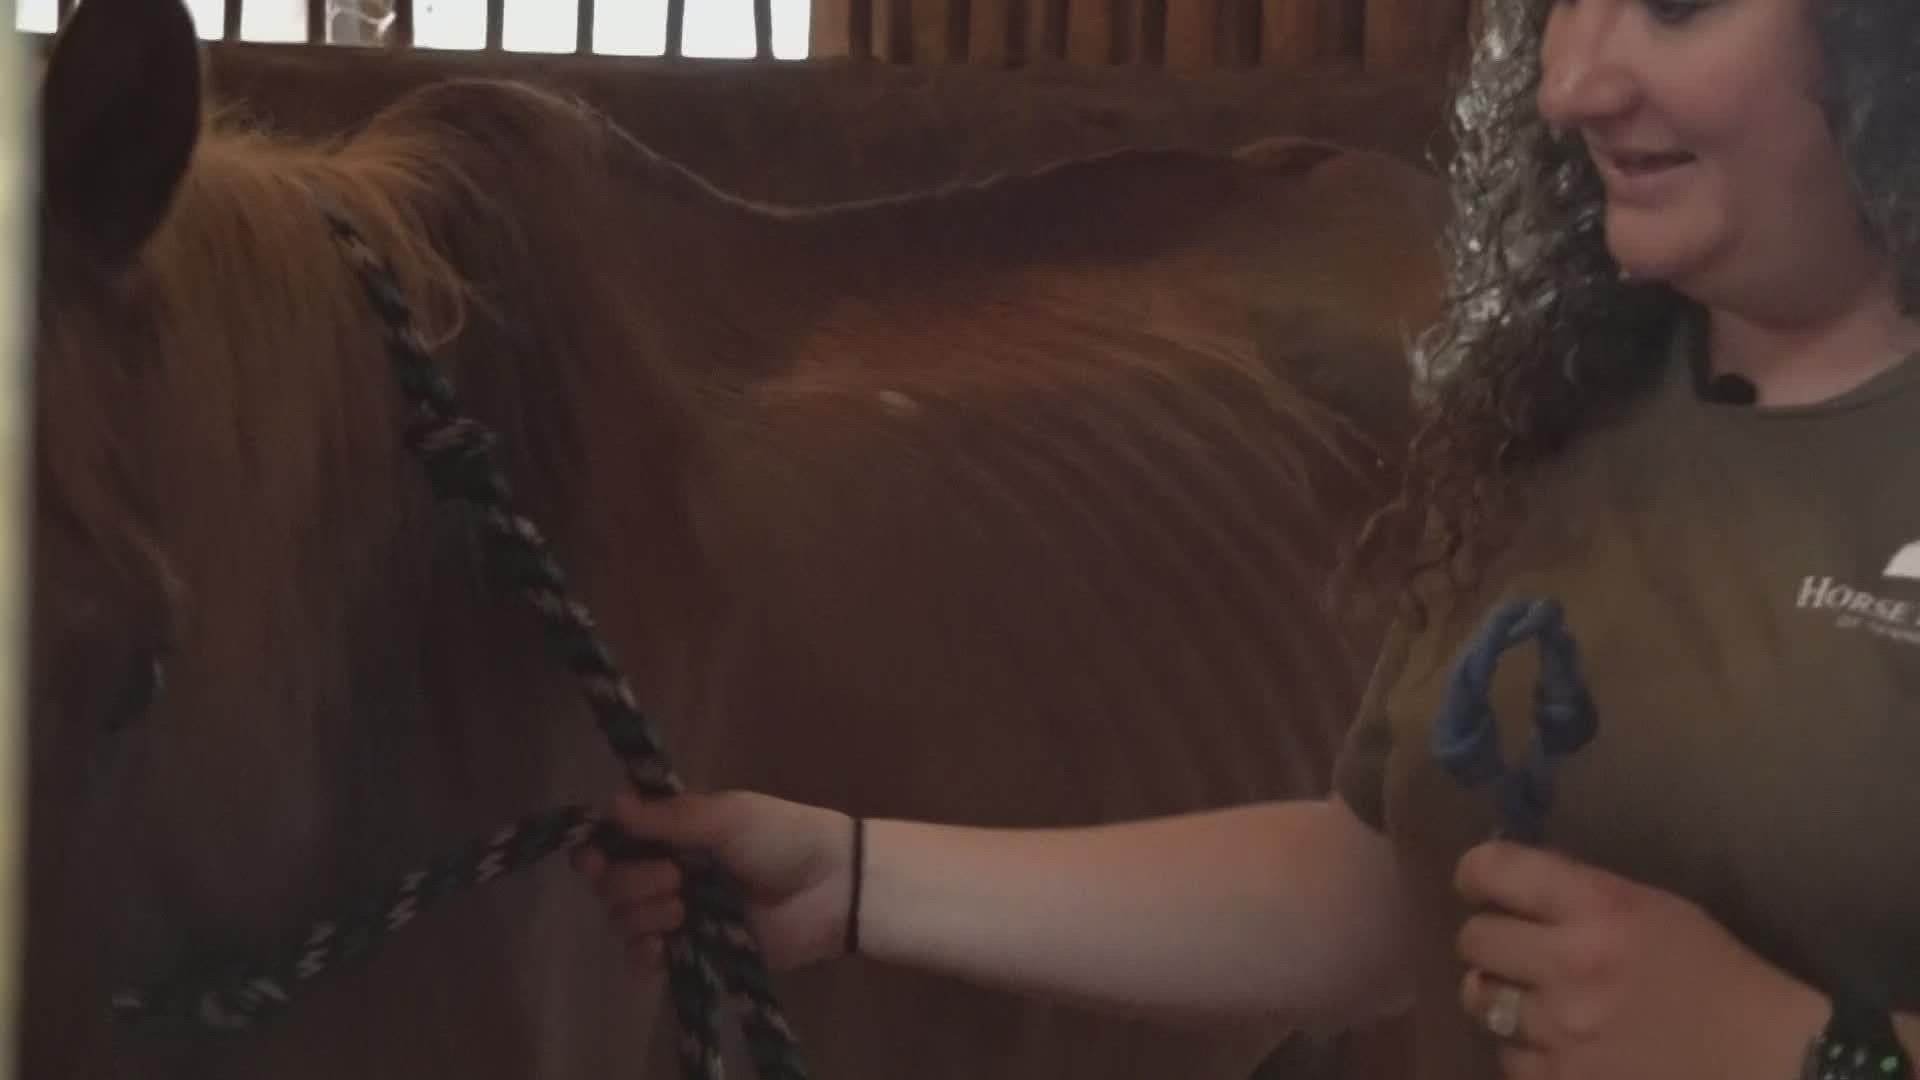 The non-profit says it has seen an uptick in horse rescues across Tennessee.